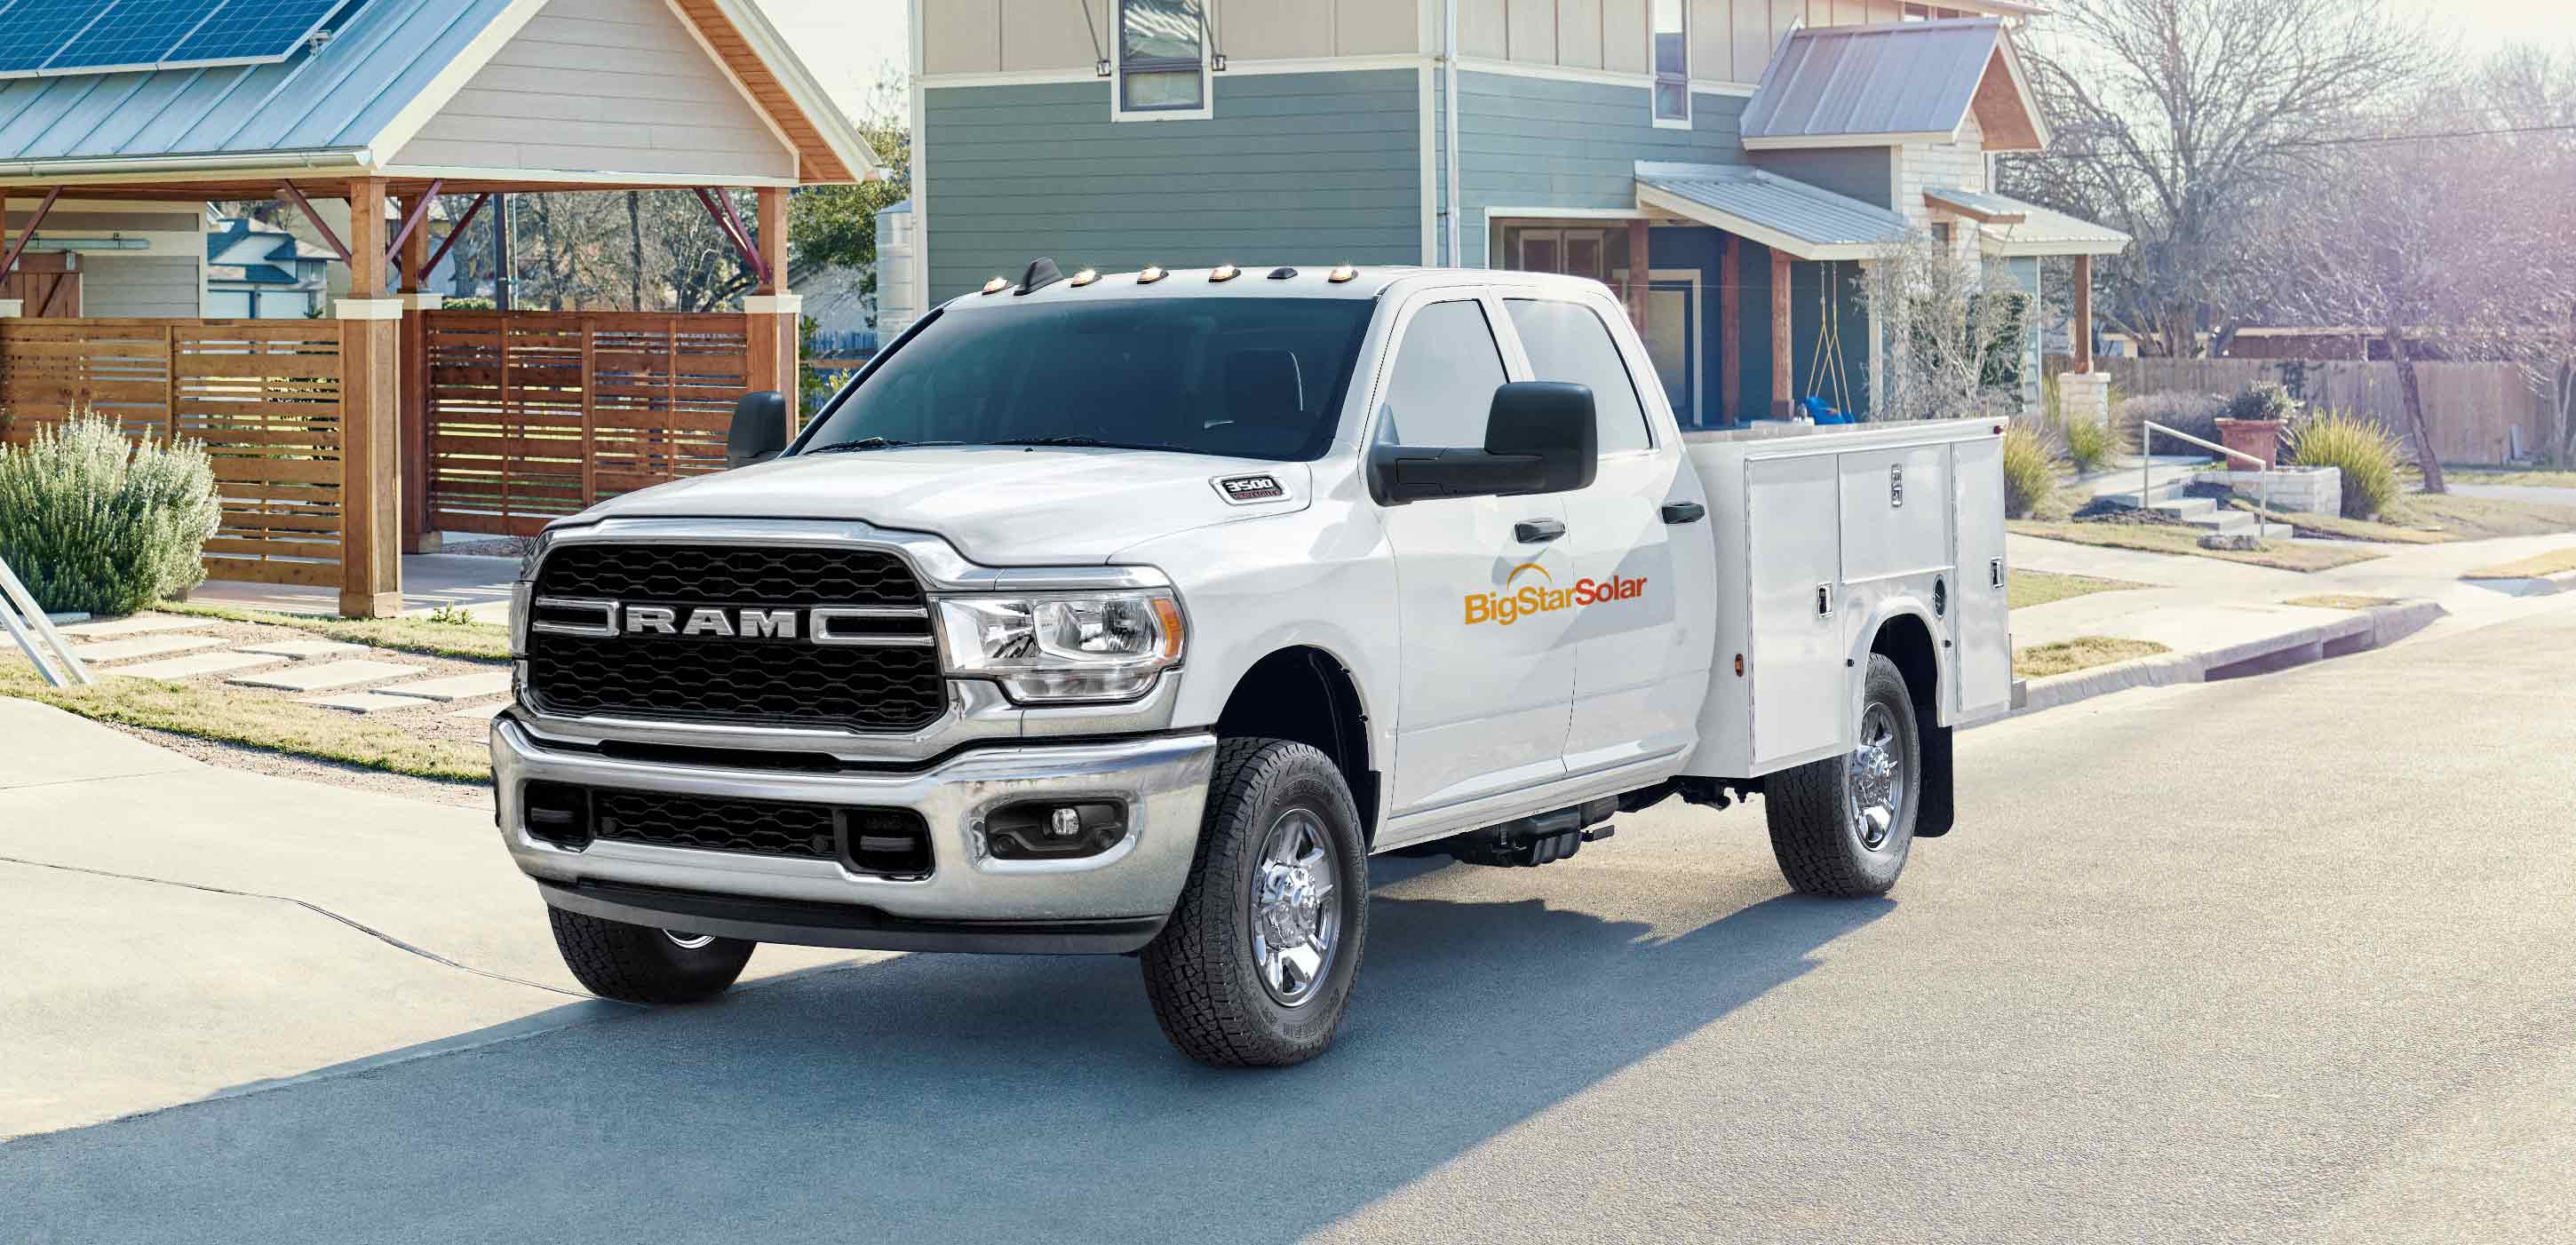 Display A white 2024 Ram 3500 Tradesman Chassis Cab Crew Cab with a solar company logo on its side, parked in front of a home with solar panels on the garage roof.